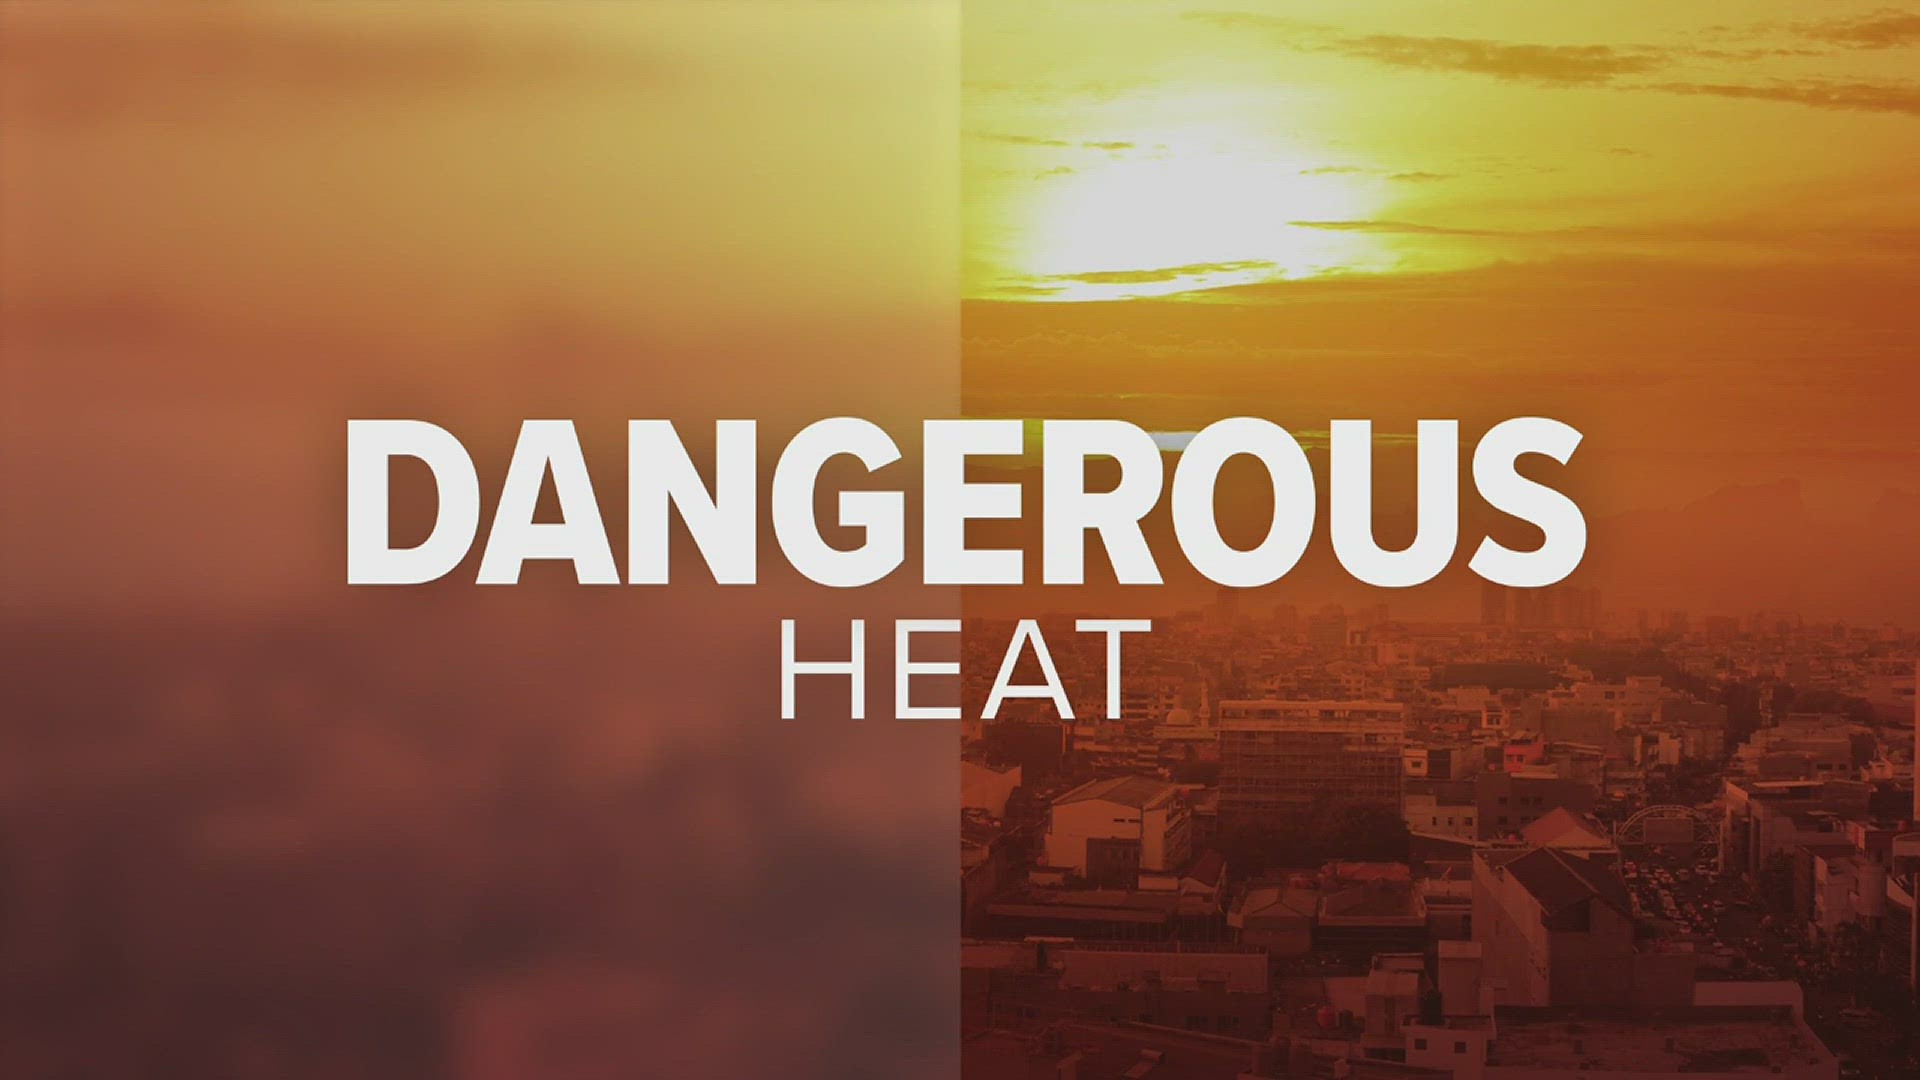 Some schools in the area will be closing early due to the extreme heat alongside air conditioning repairs.